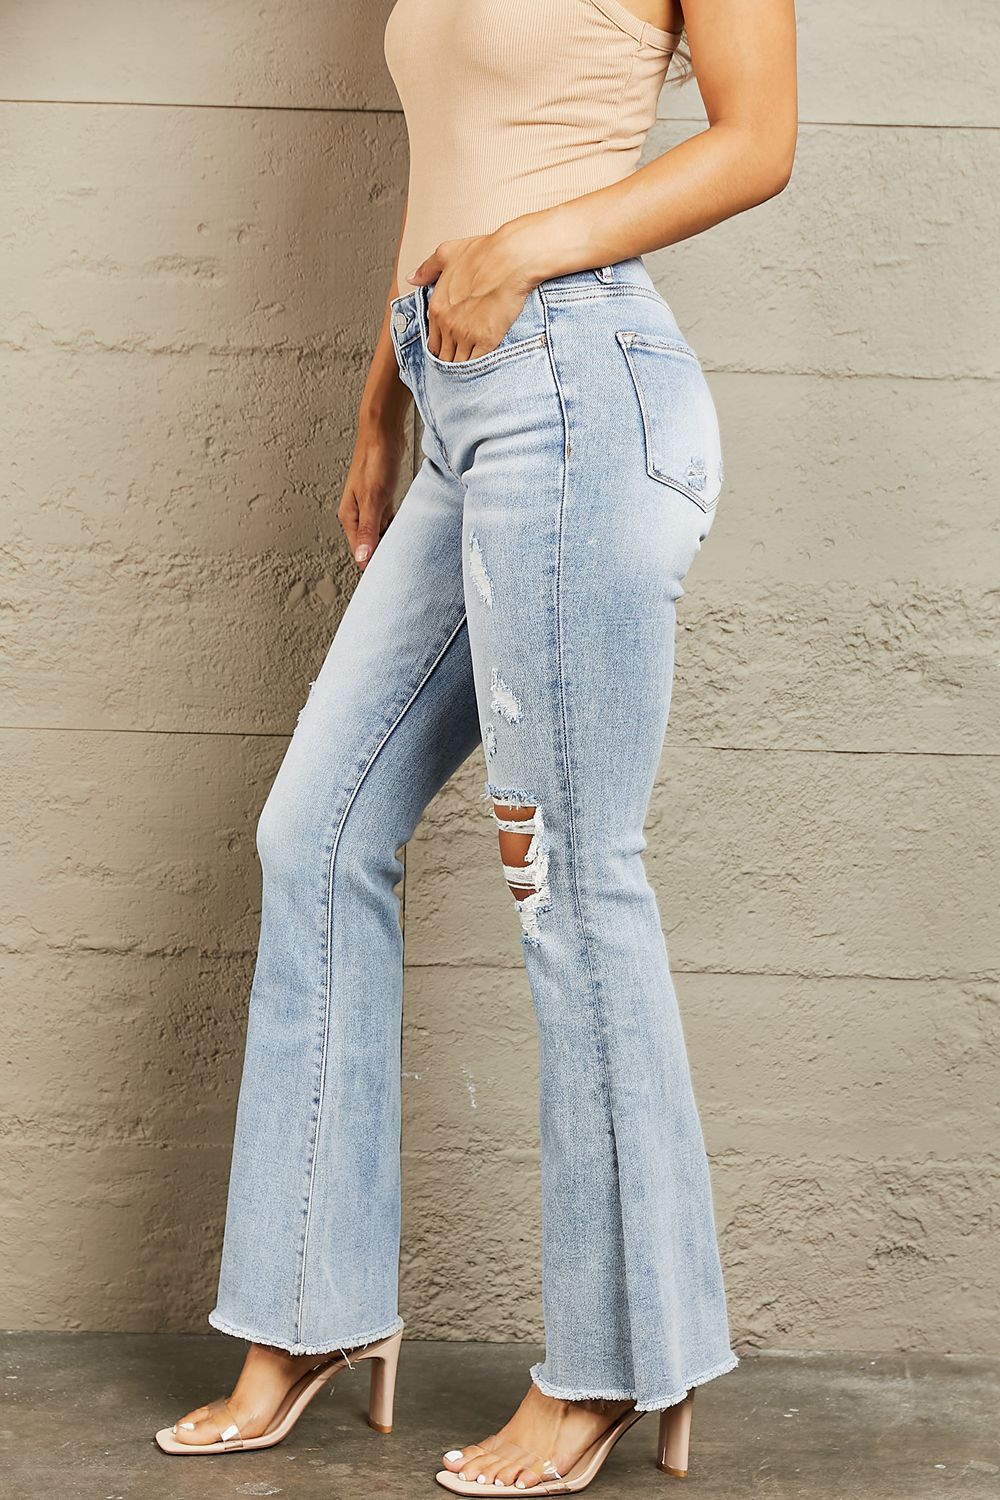 BAYEAS Mid Rise Distressed Flare Jeans - Jeans - FITGGINS